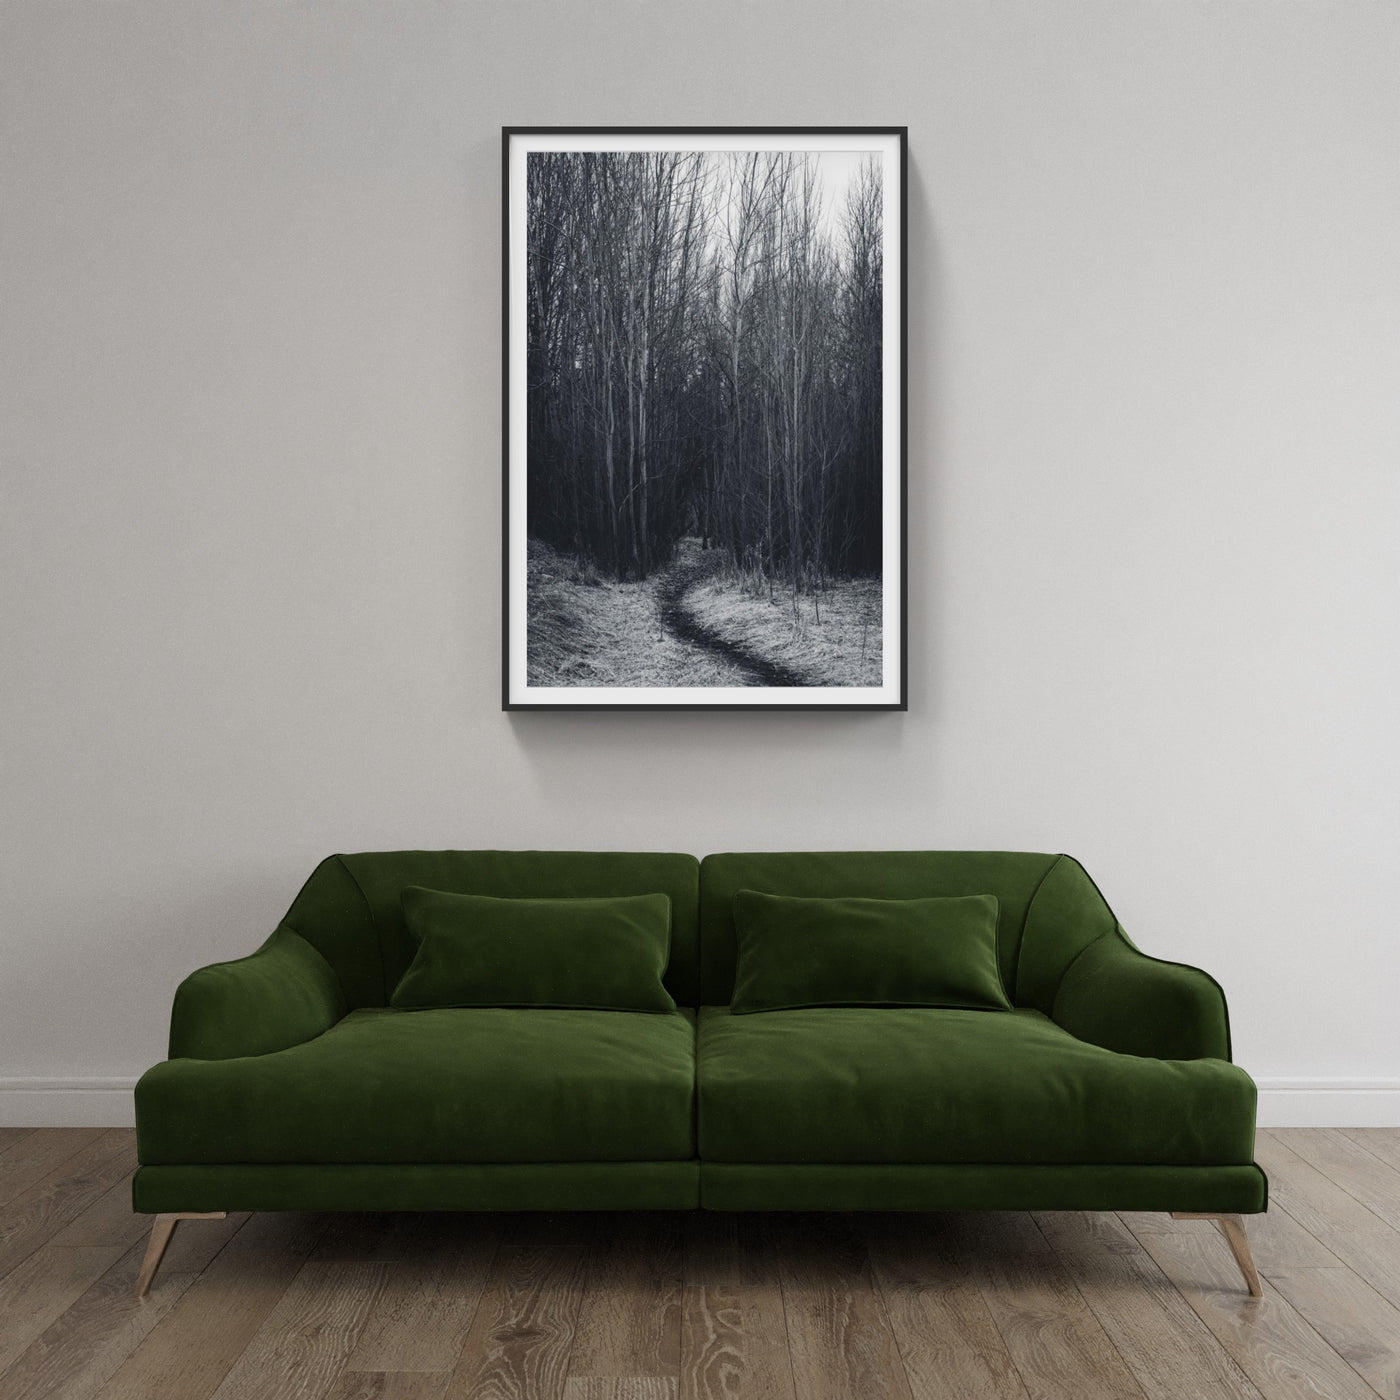 Dark narrow wooded forest with a path photo hanging above a green couch